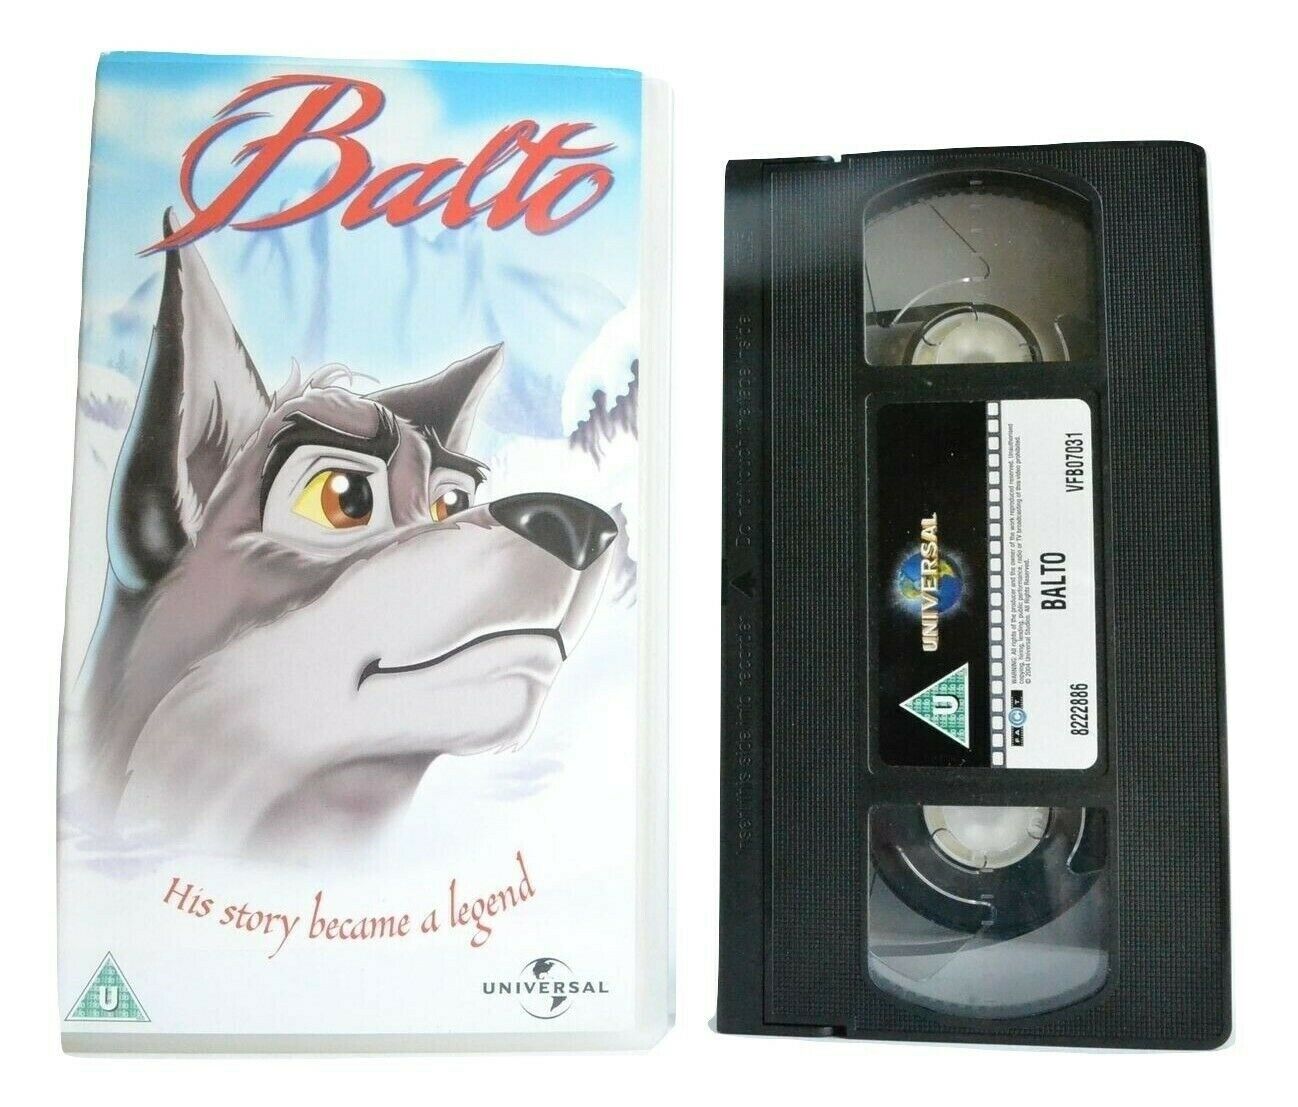 Balto (1995):Based On True Story - Animated Adventure - Kevin Bacon - Kids - VHS-